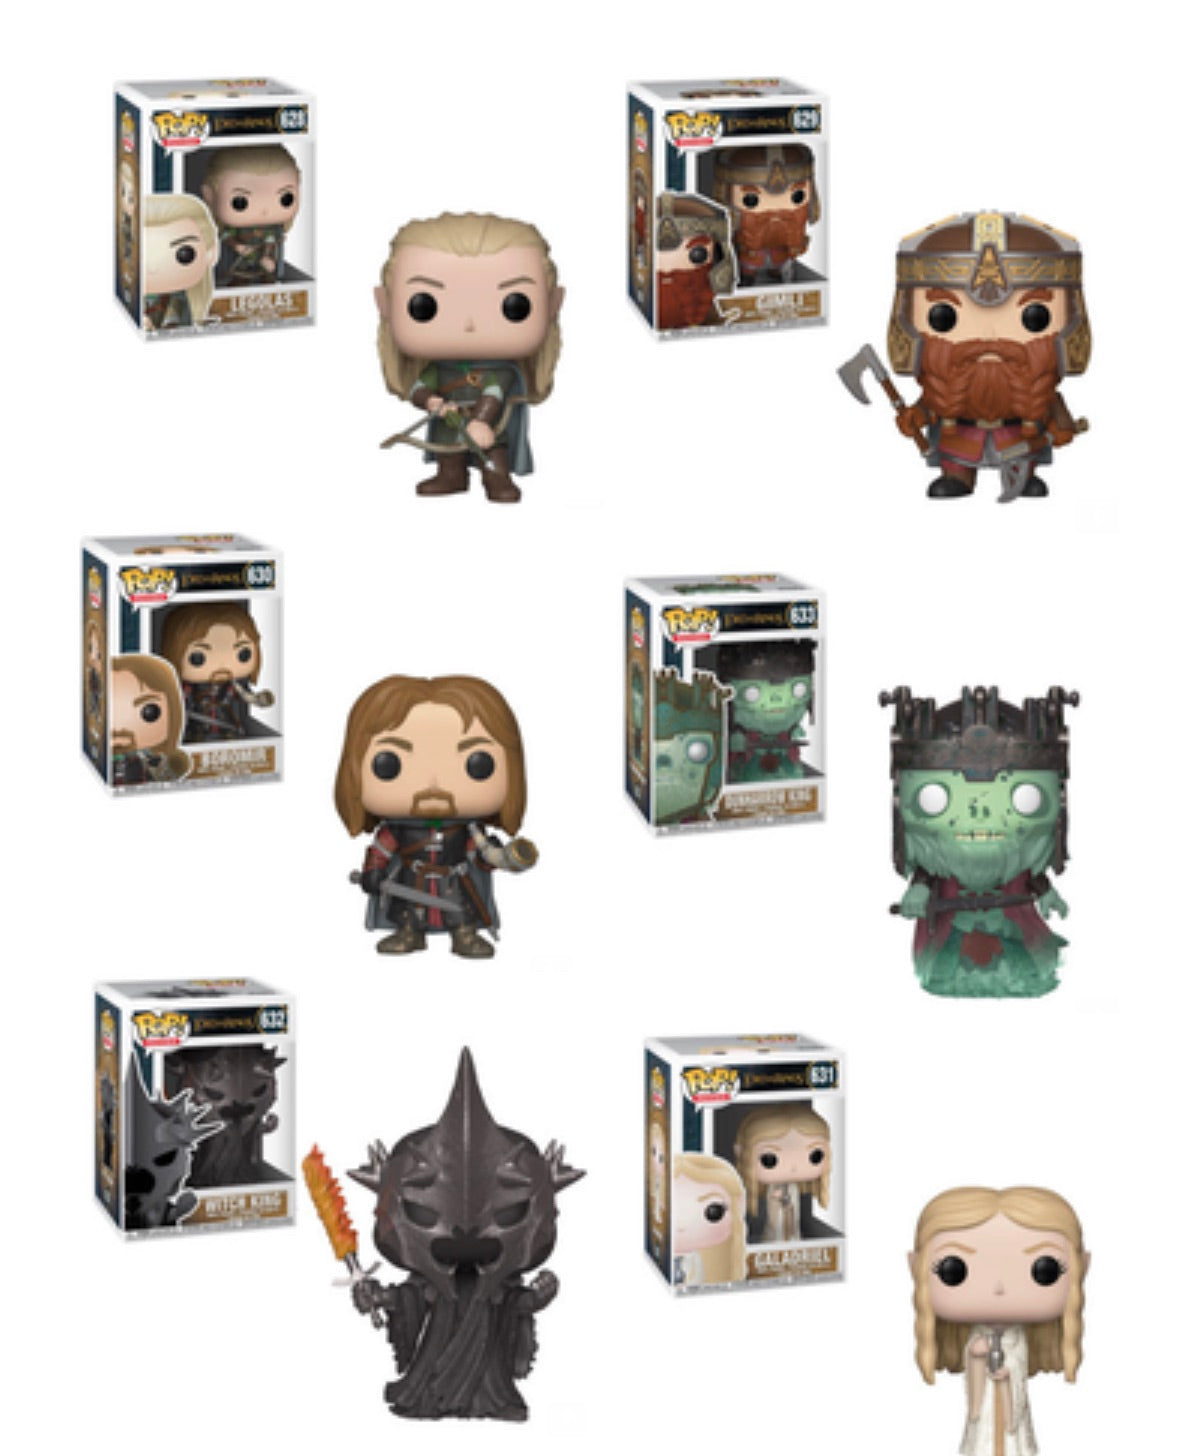 LORD OF THE RINGS FUNKO POP! COMPLETE SET OF 6 (PRE-ORDER)